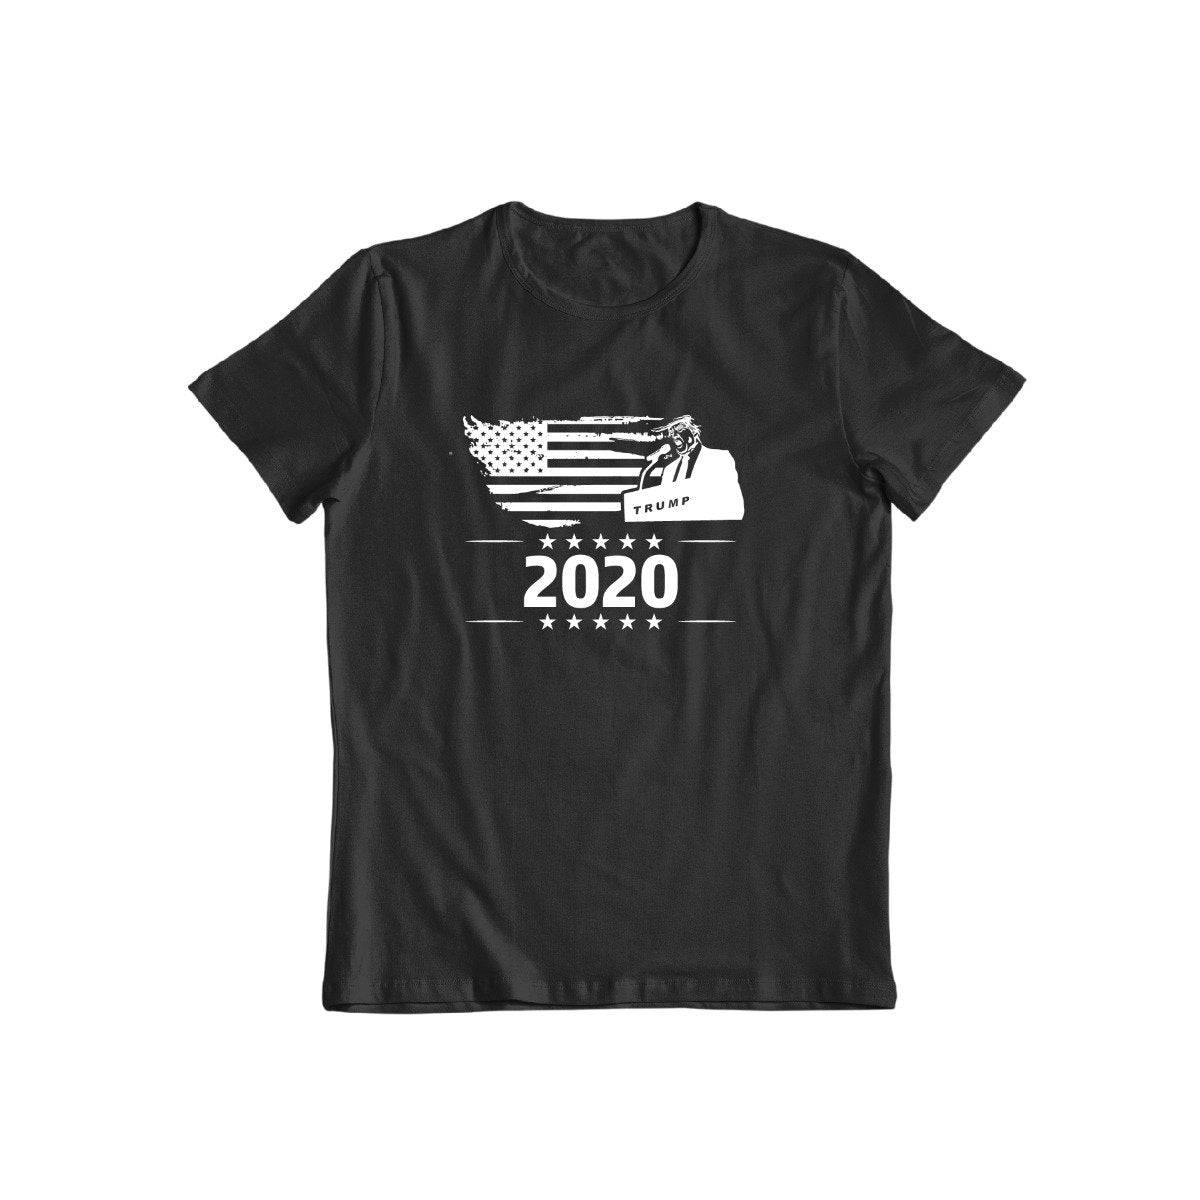 Trump 2020 T-Shirt for Men and Women / Black / Small